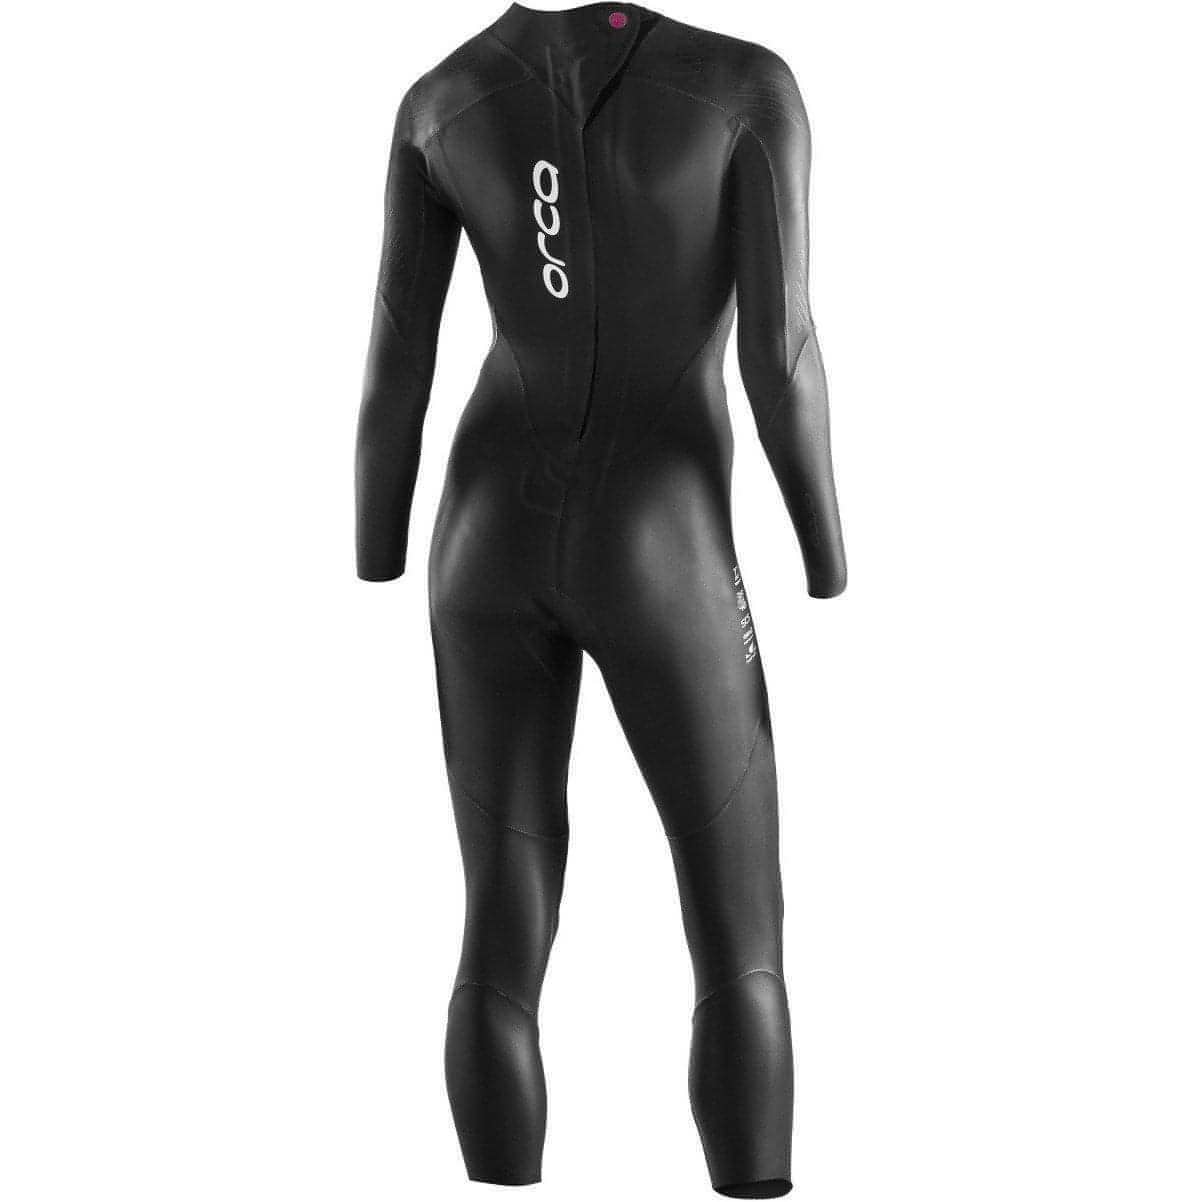 Orca Fina Perform Womens Openwater Wetsuit - Black - Start Fitness